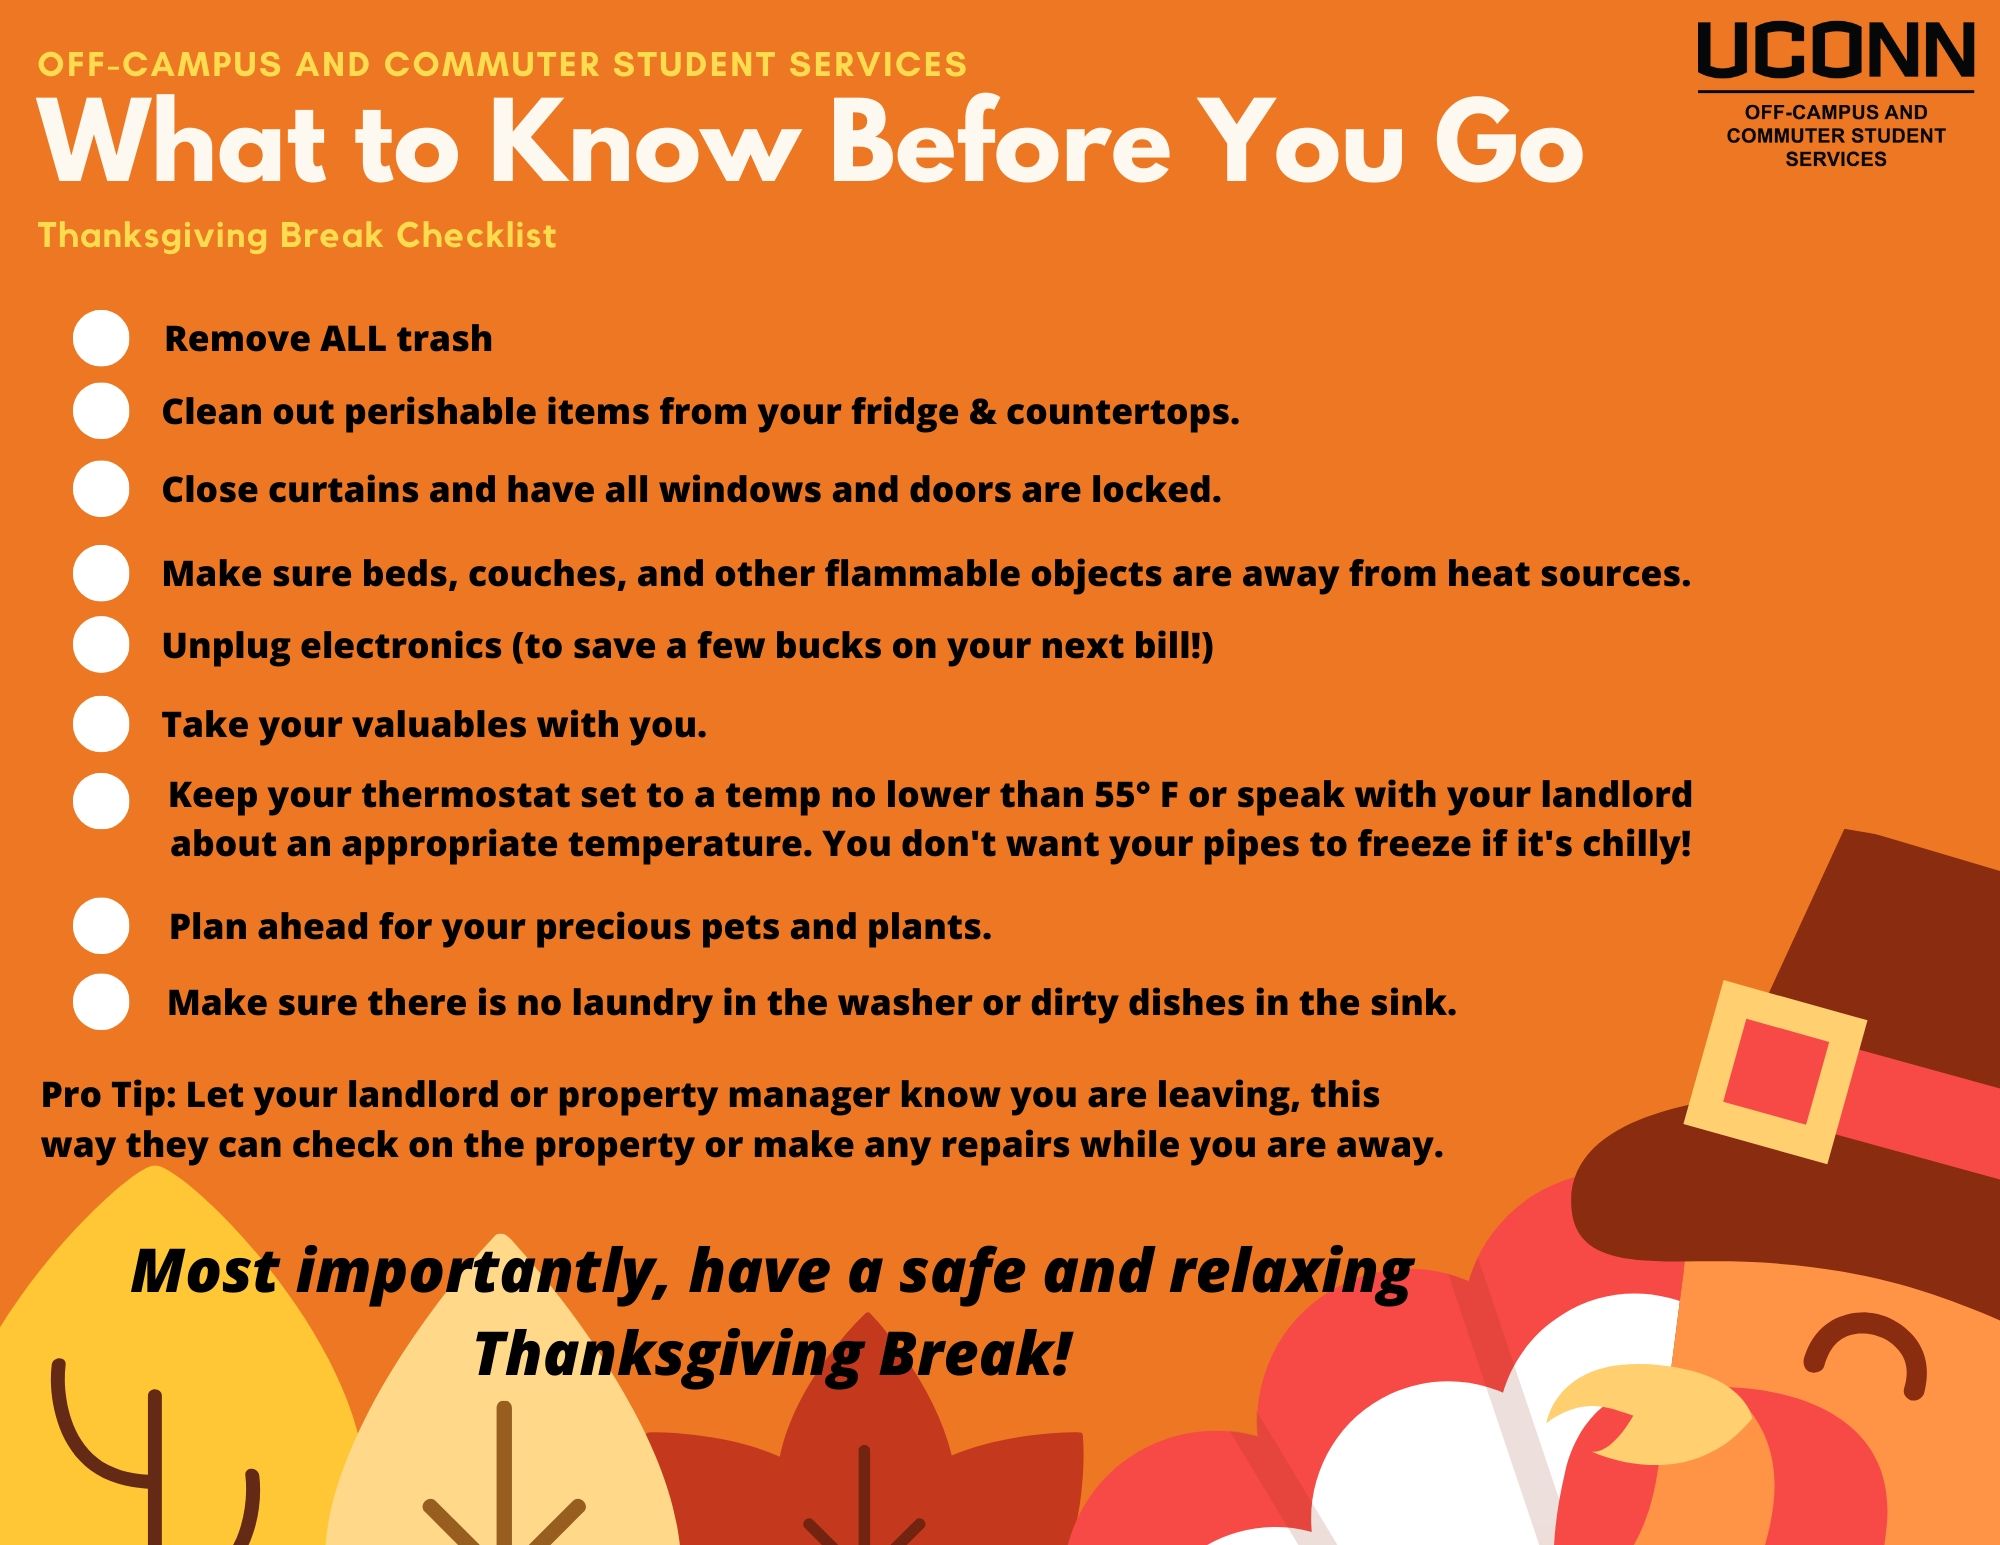 What to Know Before You Go, Thanksgiving Break! OffCampus and